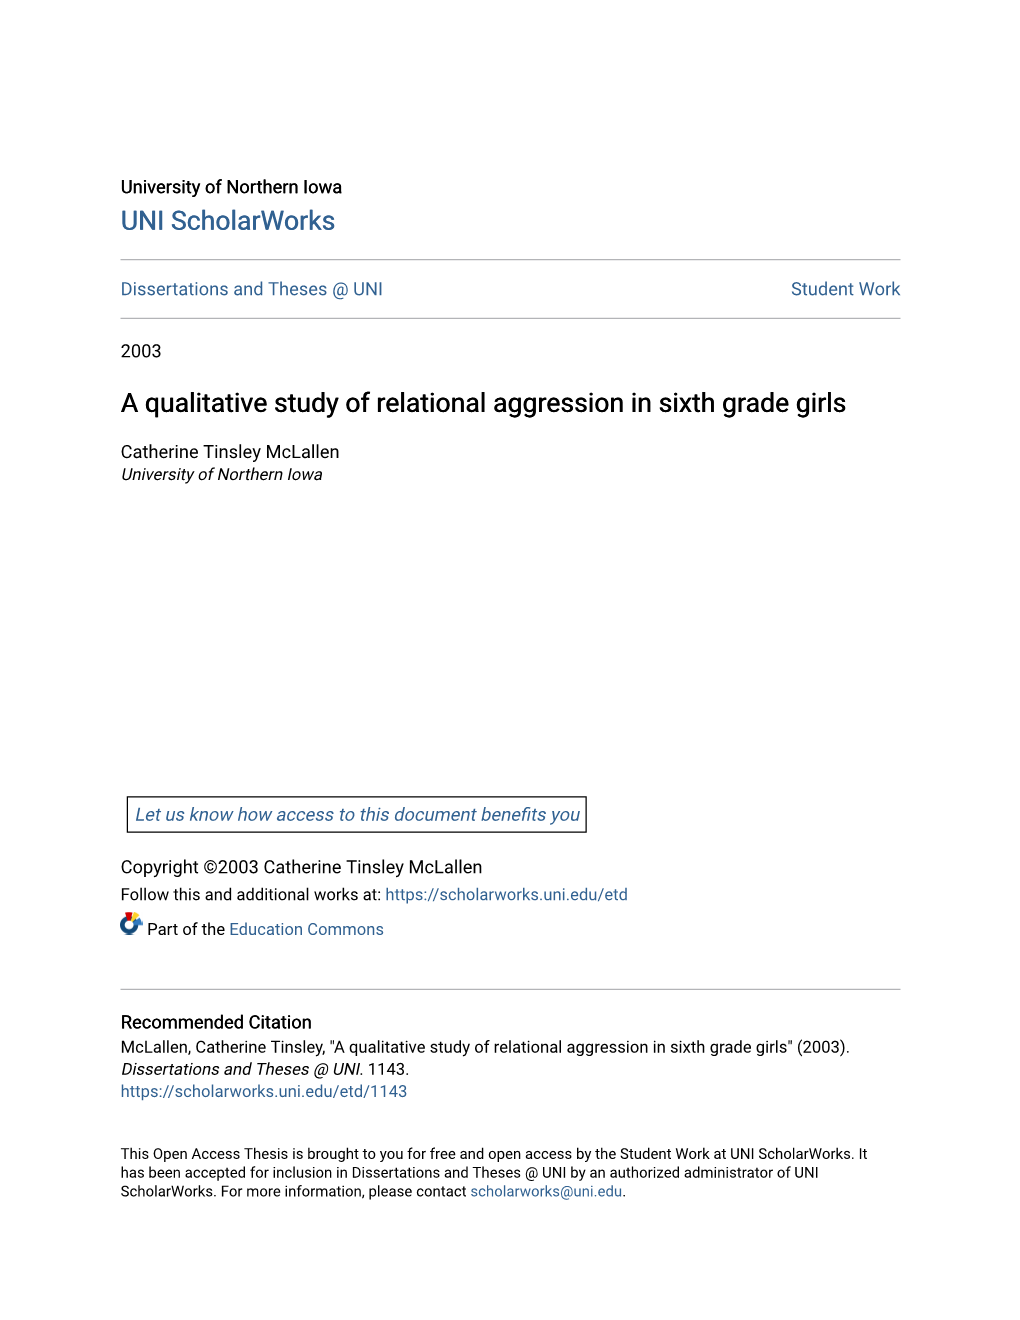 A Qualitative Study of Relational Aggression in Sixth Grade Girls